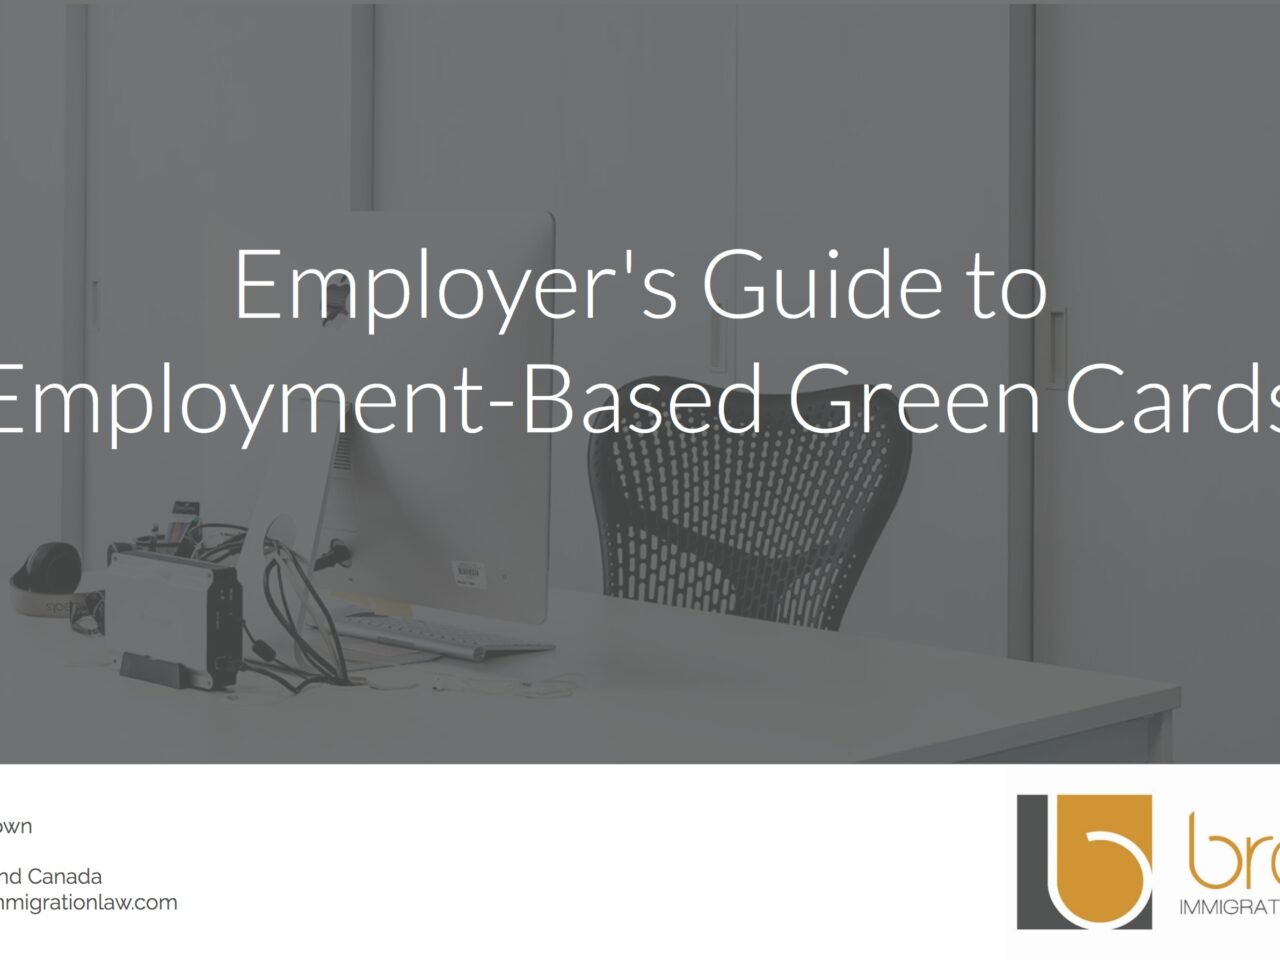 Employer's Guide to Employment-Based Green Cards